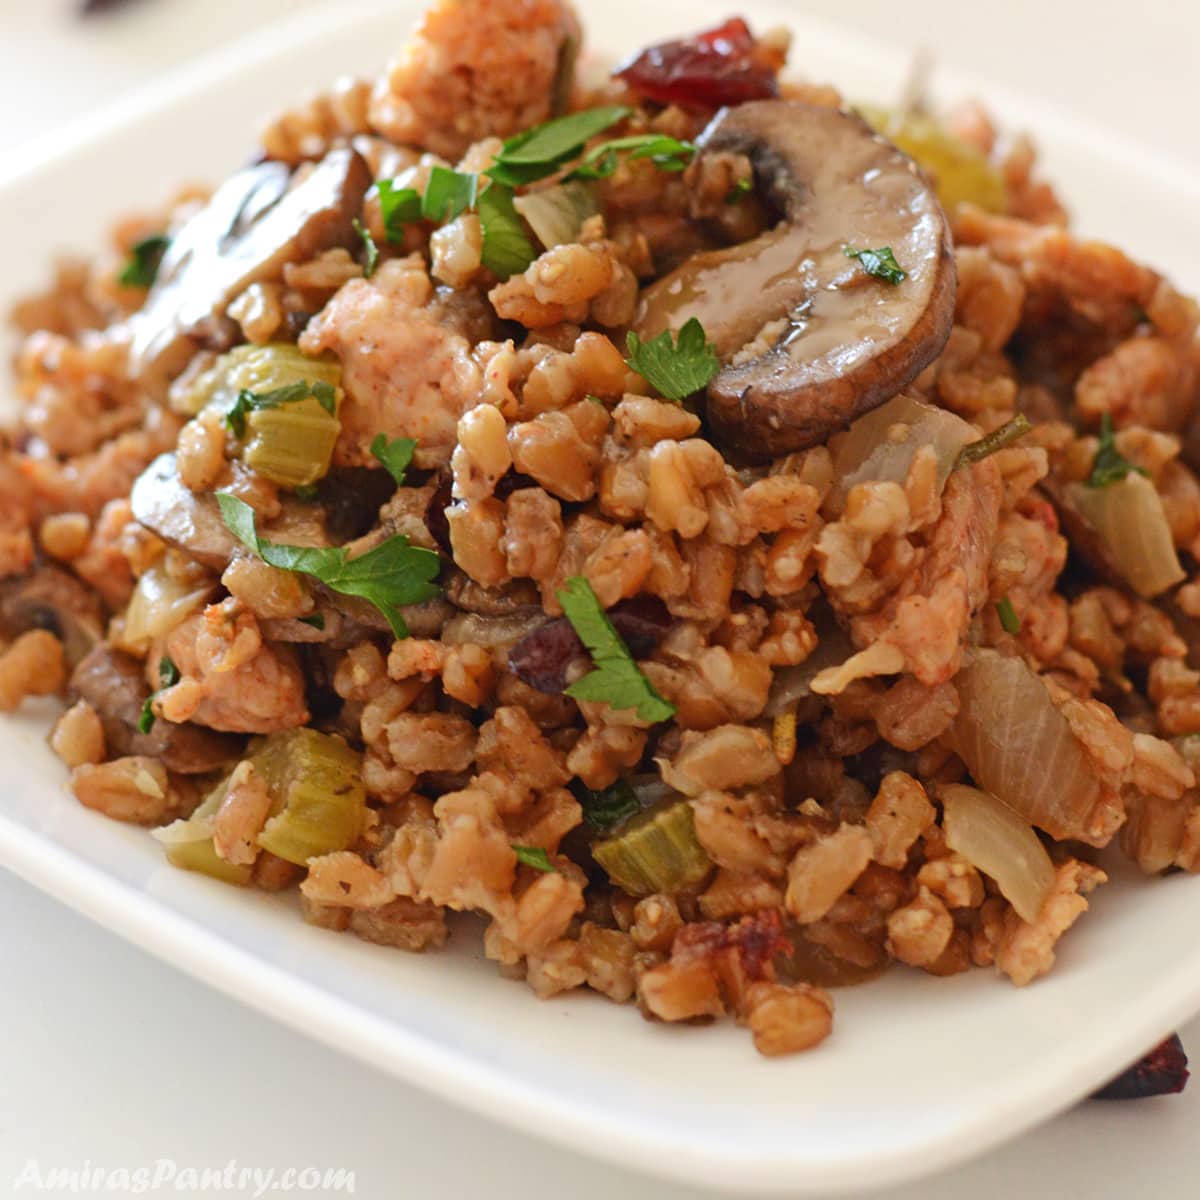 Farro stuffing in a white plate garnished with chopped parsley.